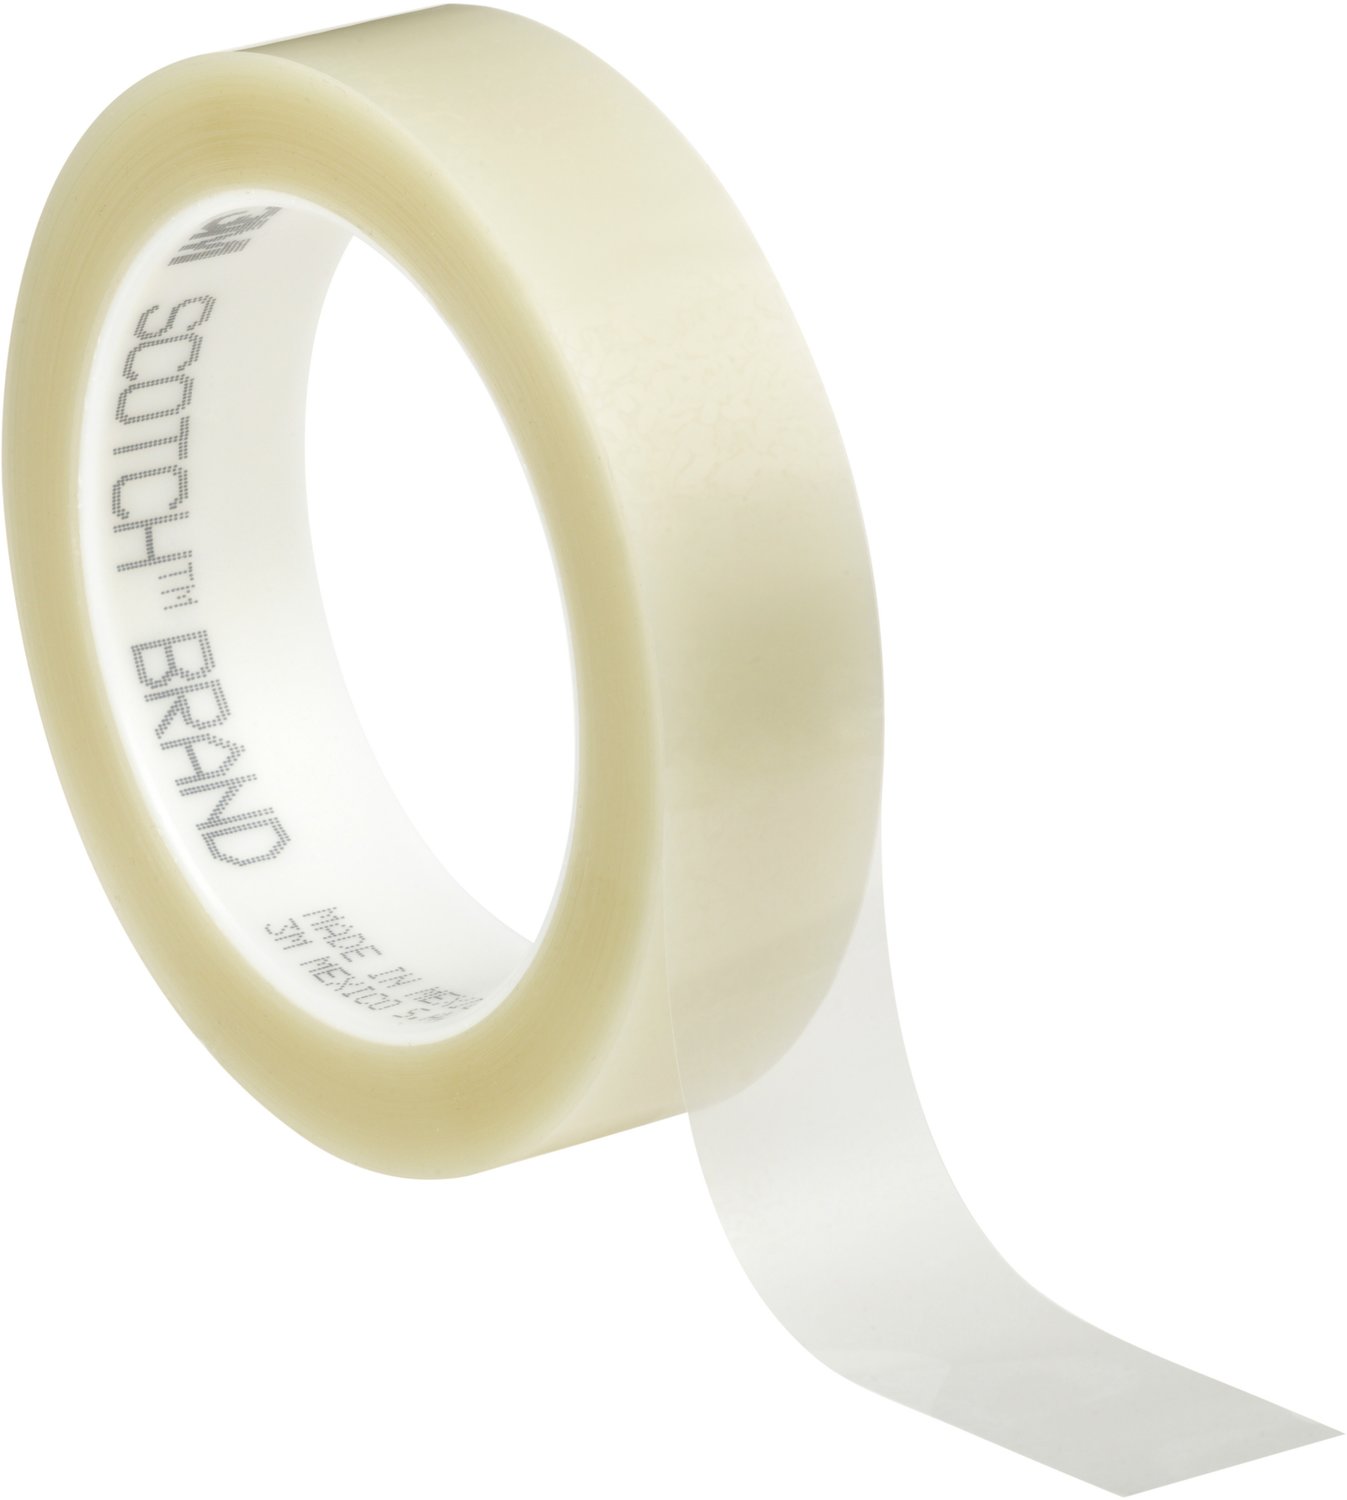 7000047523 - 3M Polyester Film Tape 853, Transparent, 1/2 in x 72 yd, 2.2 mil, 72
Rolls/Case